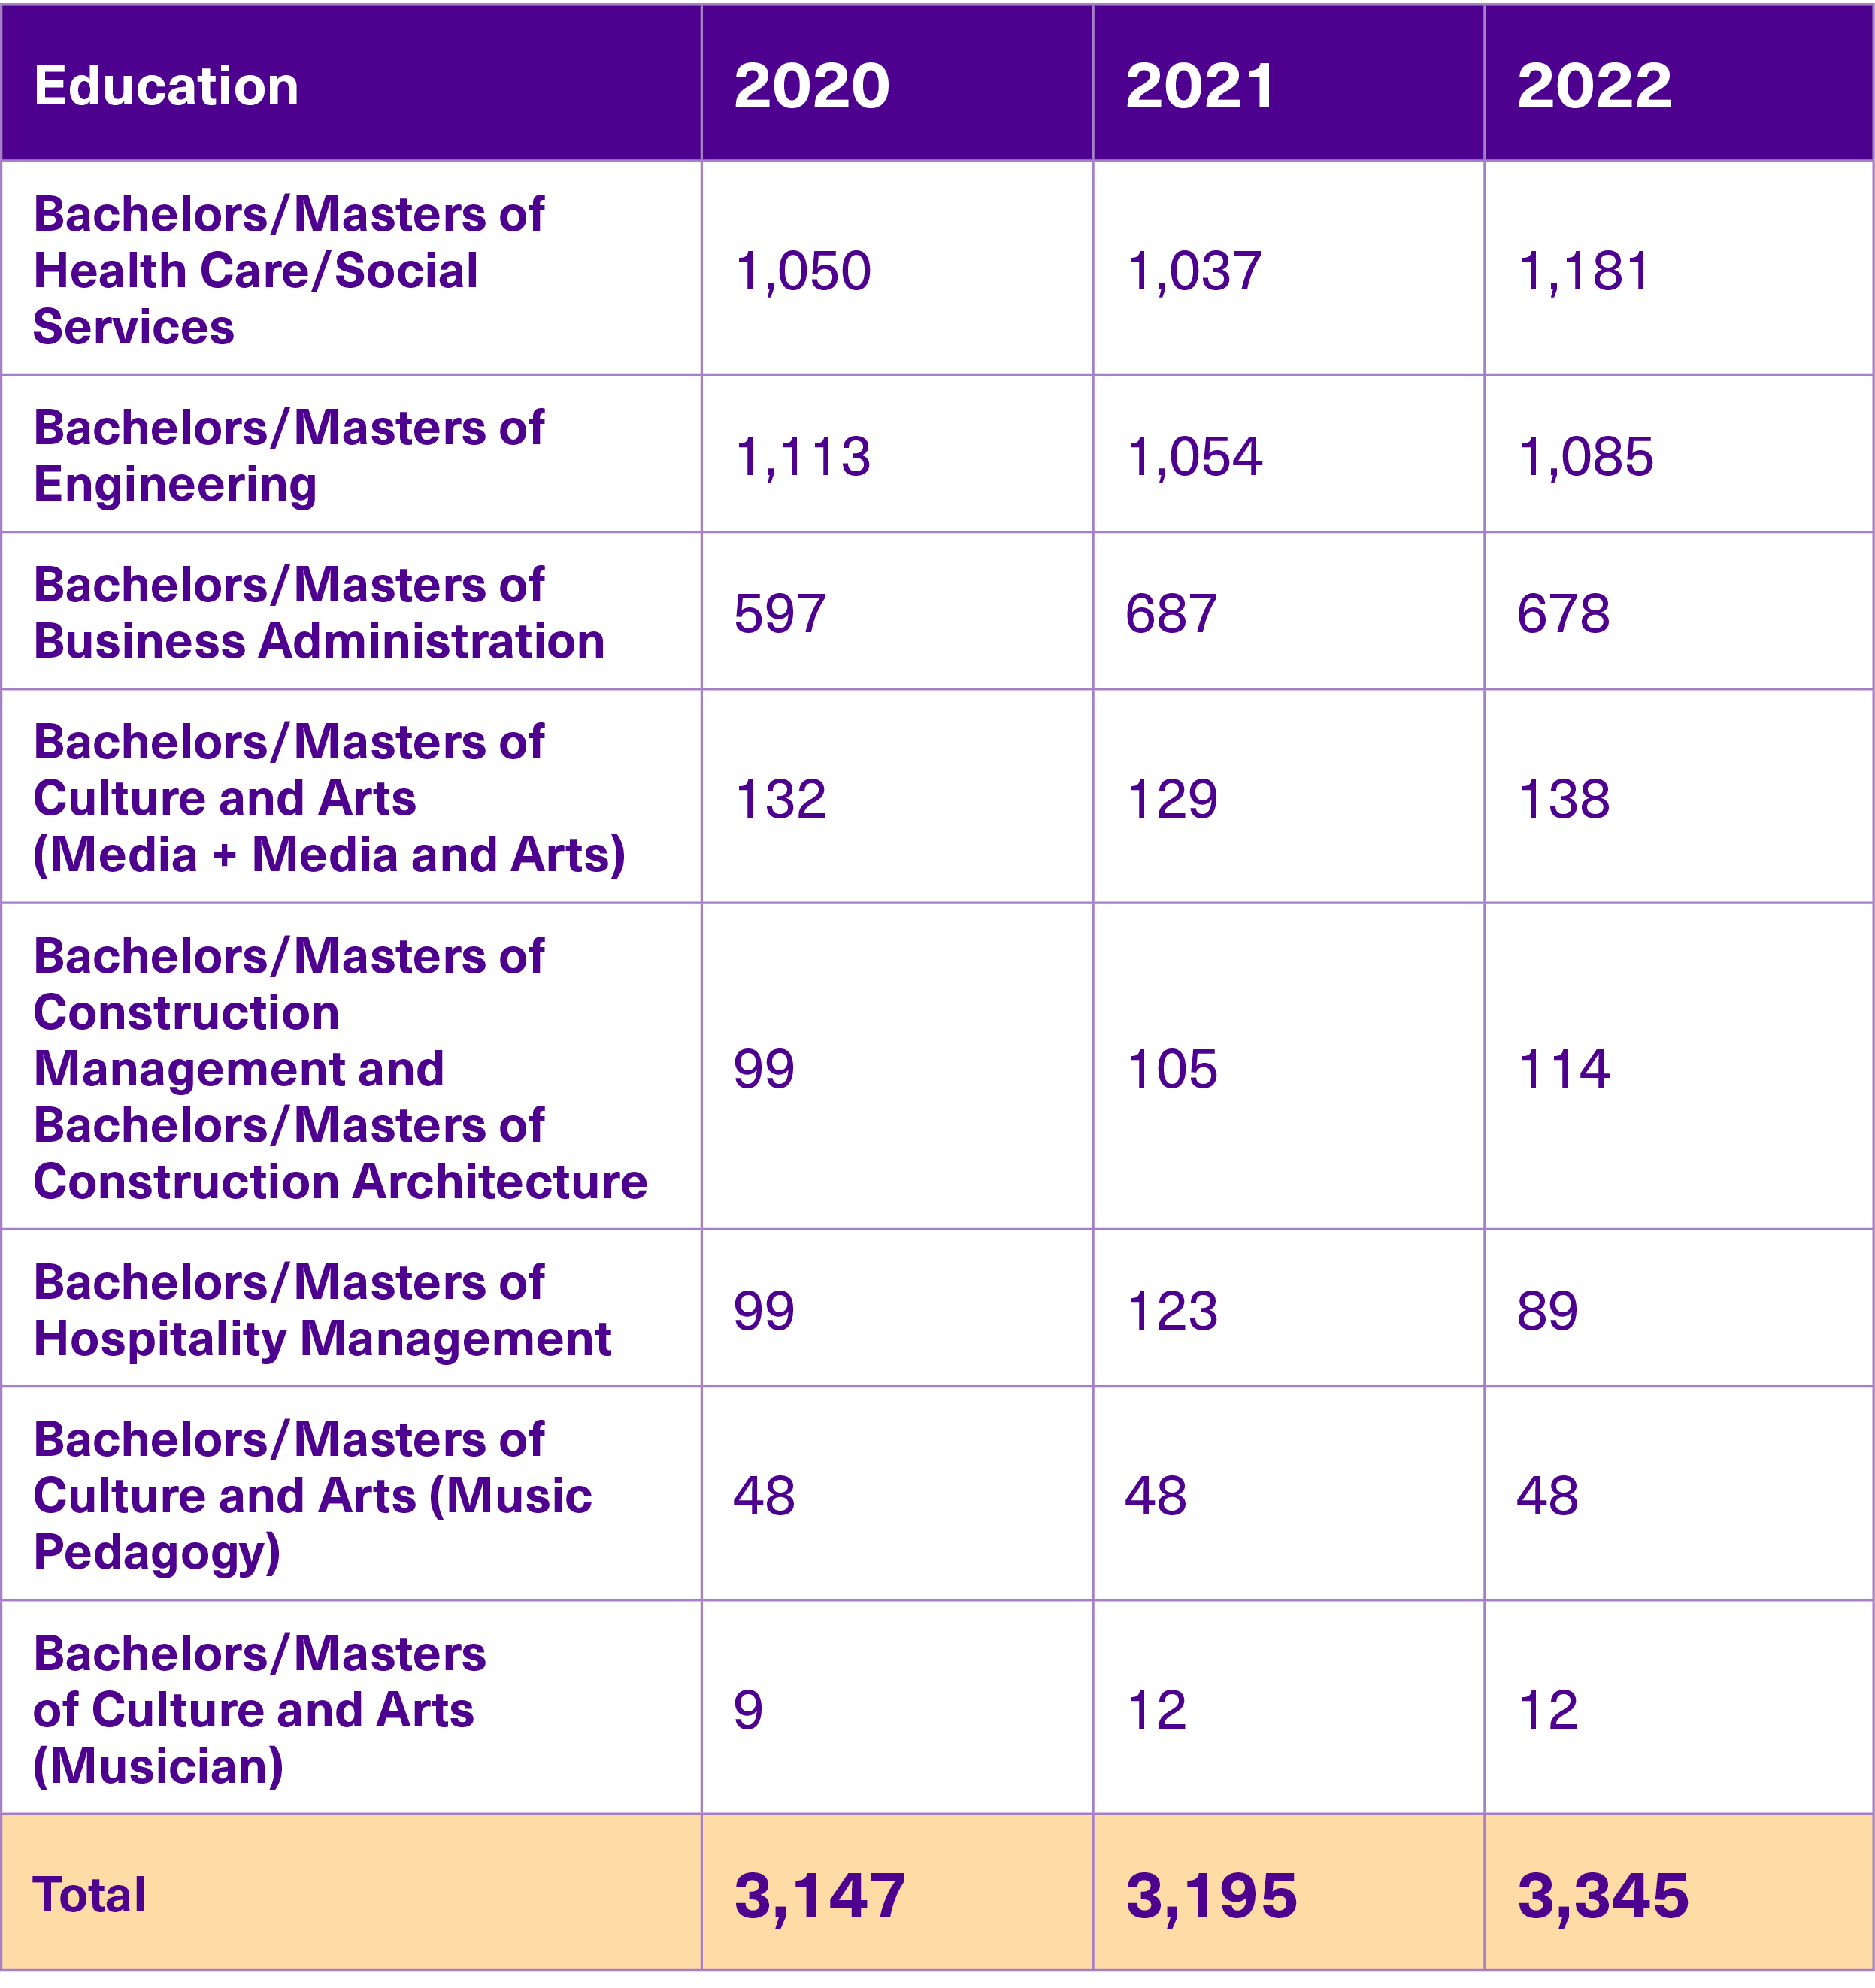 Table of number of new students 2020-2022